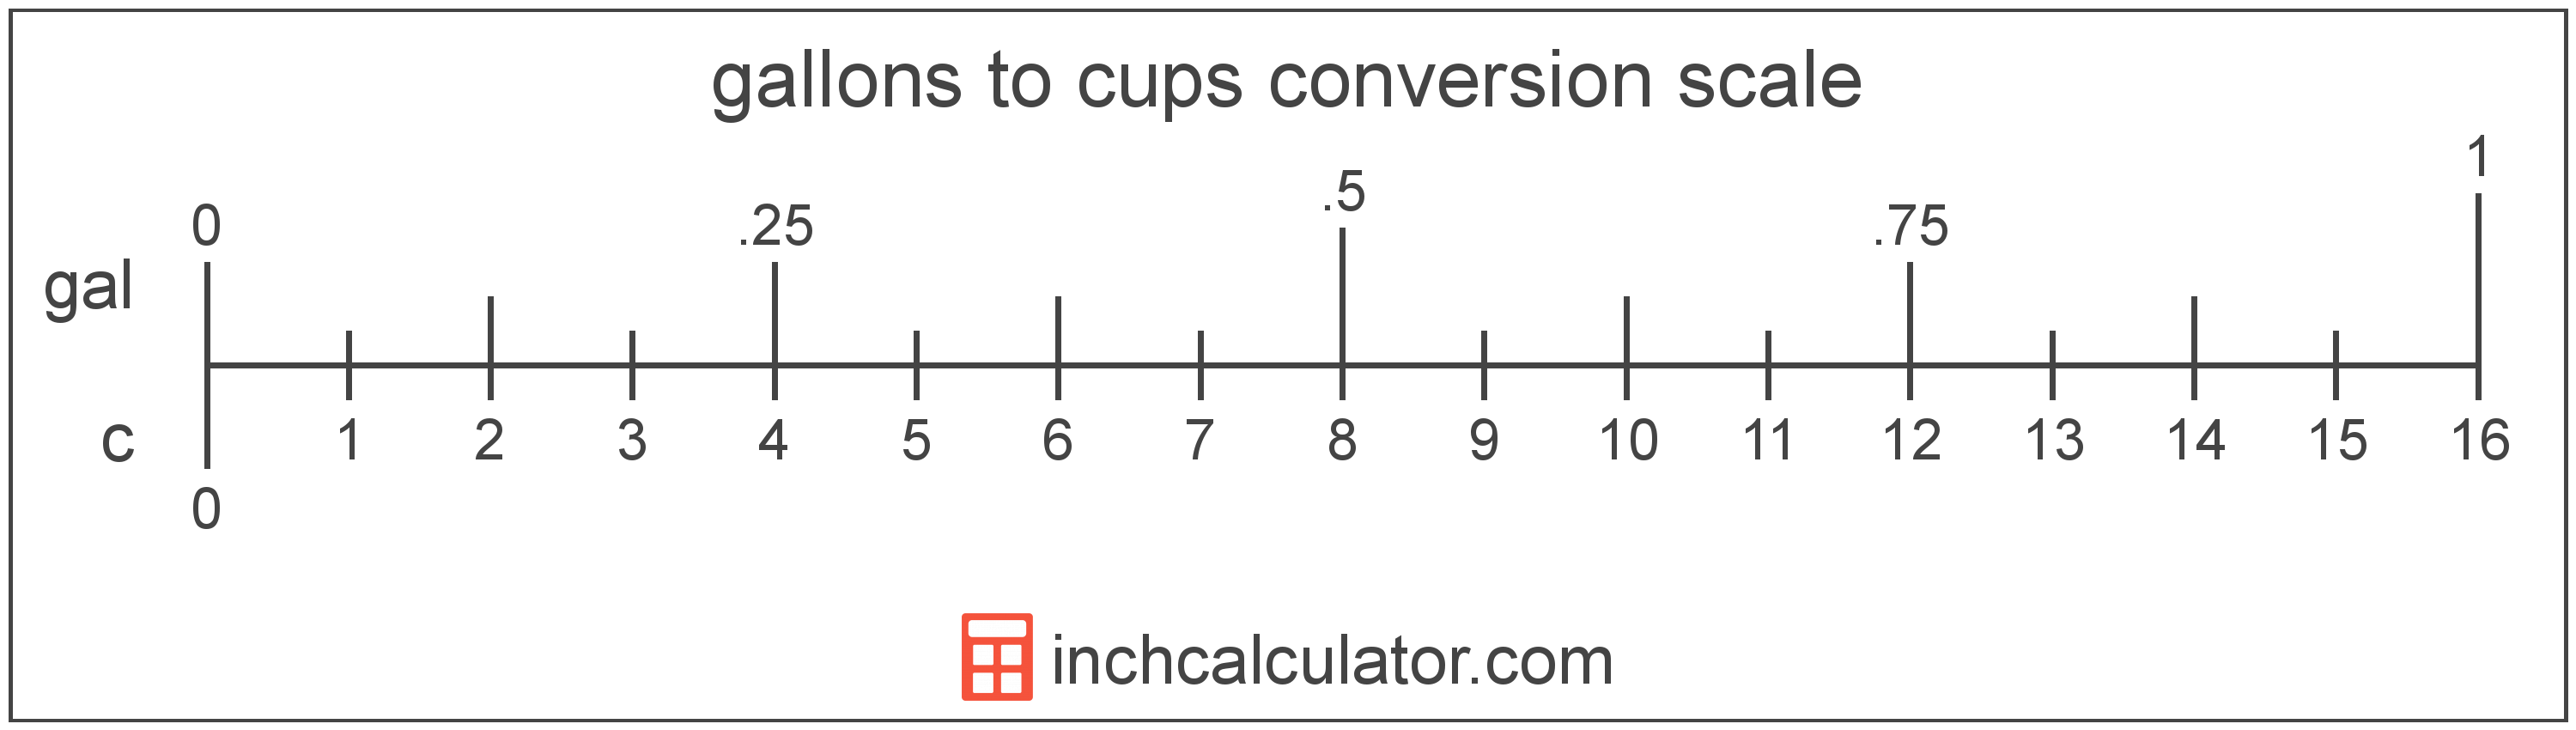 conversion scale showing cups and equivalent gallons volume values